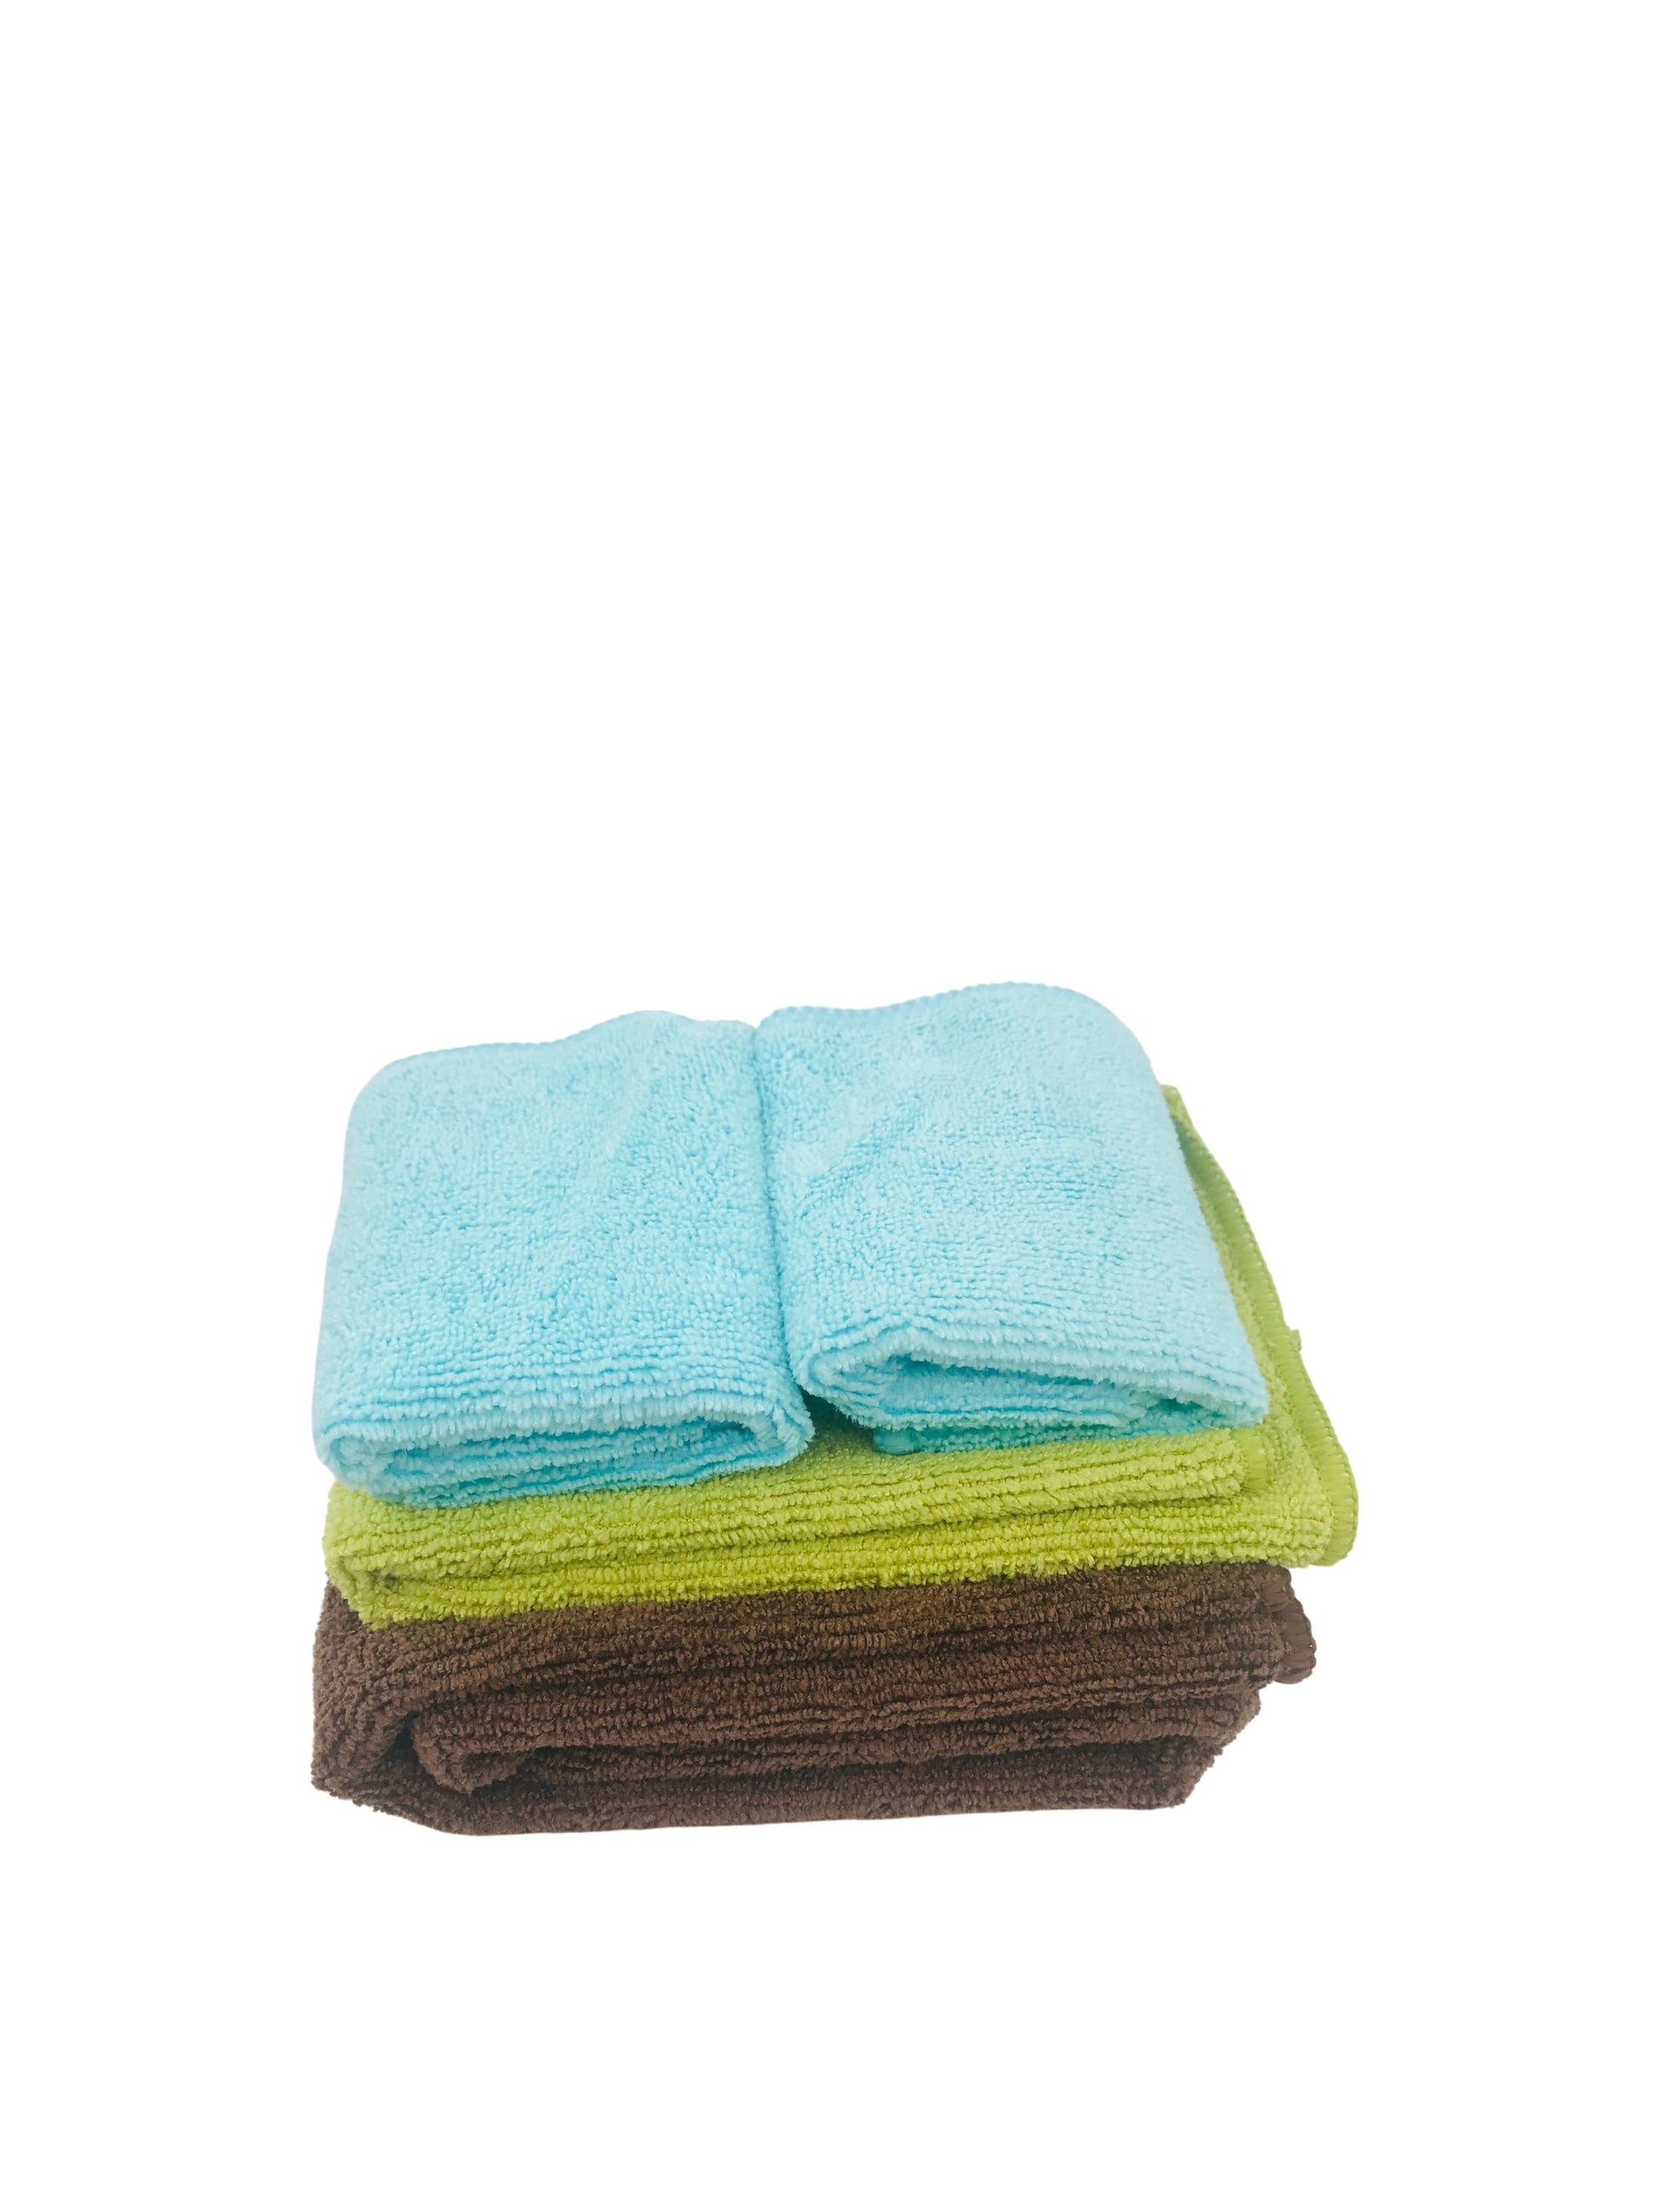 1Pcs Coffee Bar Square Towels Barista Cleaning Cloths 4 Pack